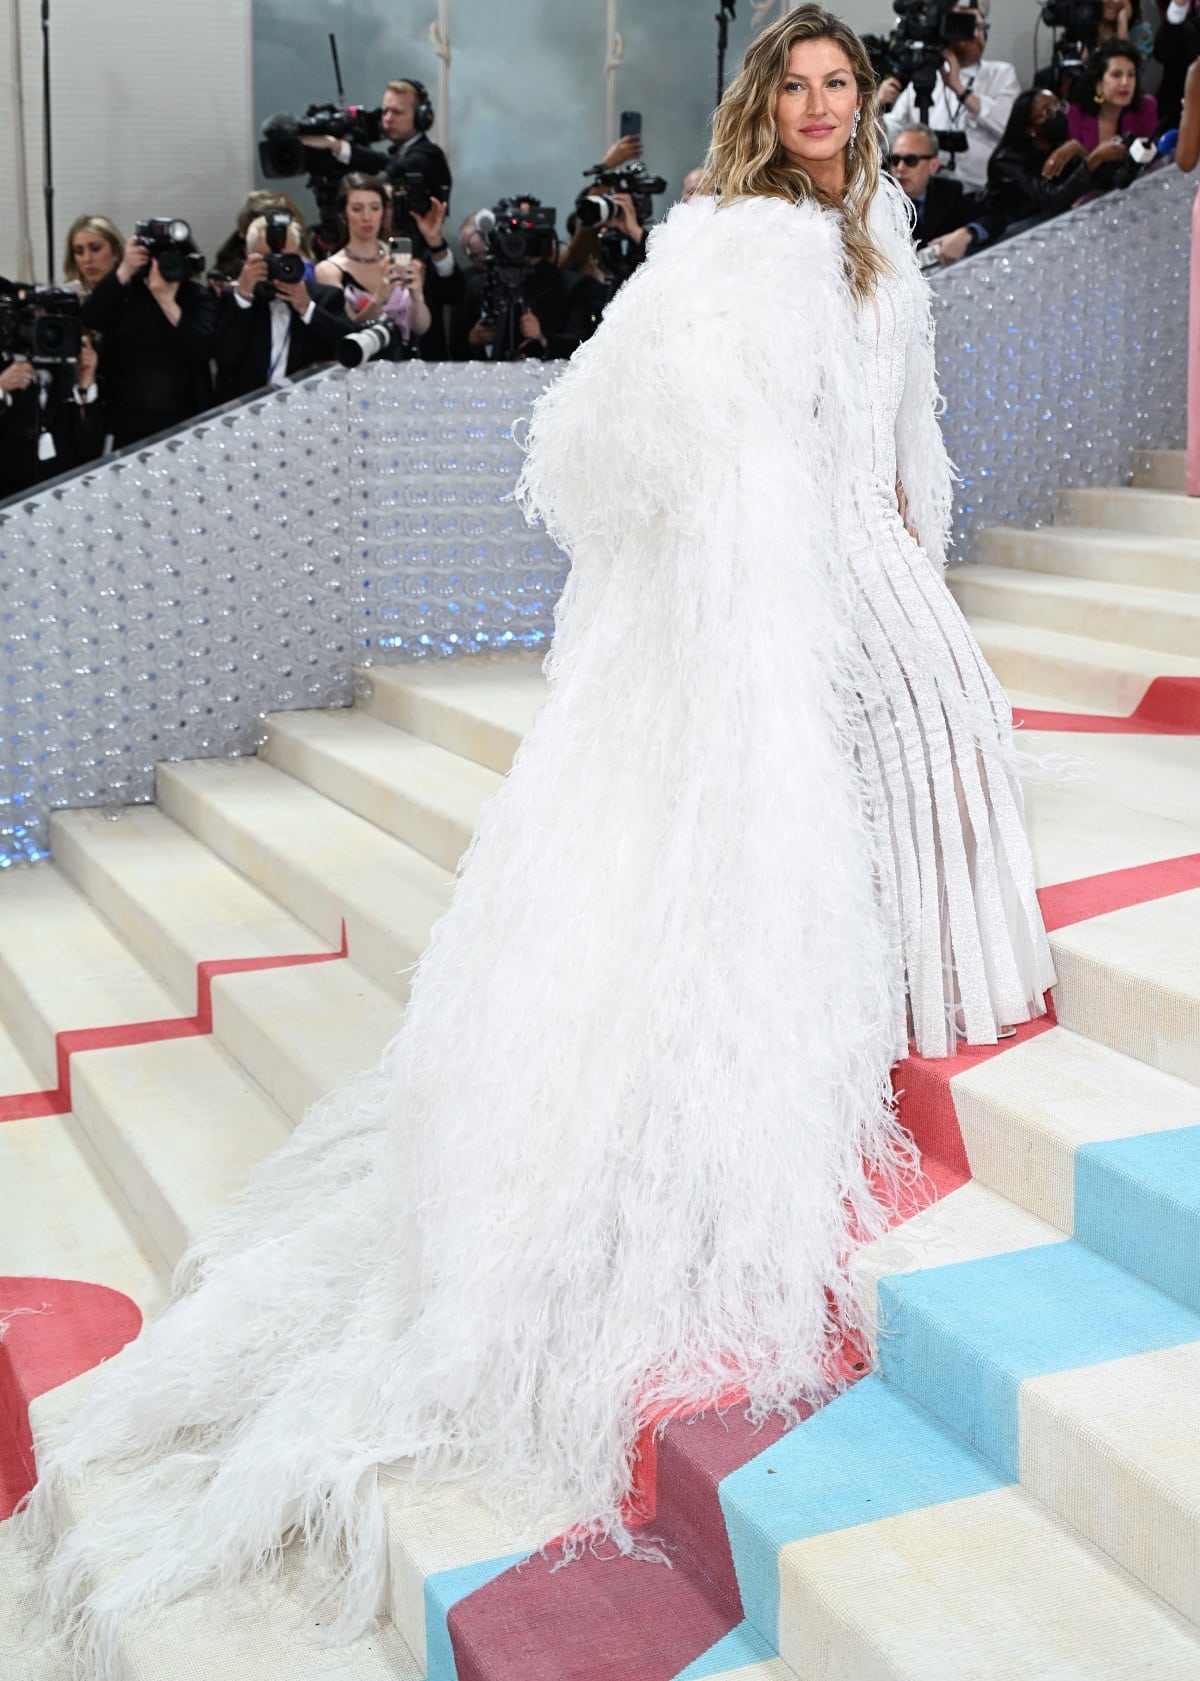 Gisele Bundchen making her way up the carpeted steps of the Metropolitan Museum of Art in her vintage Chanel outfit